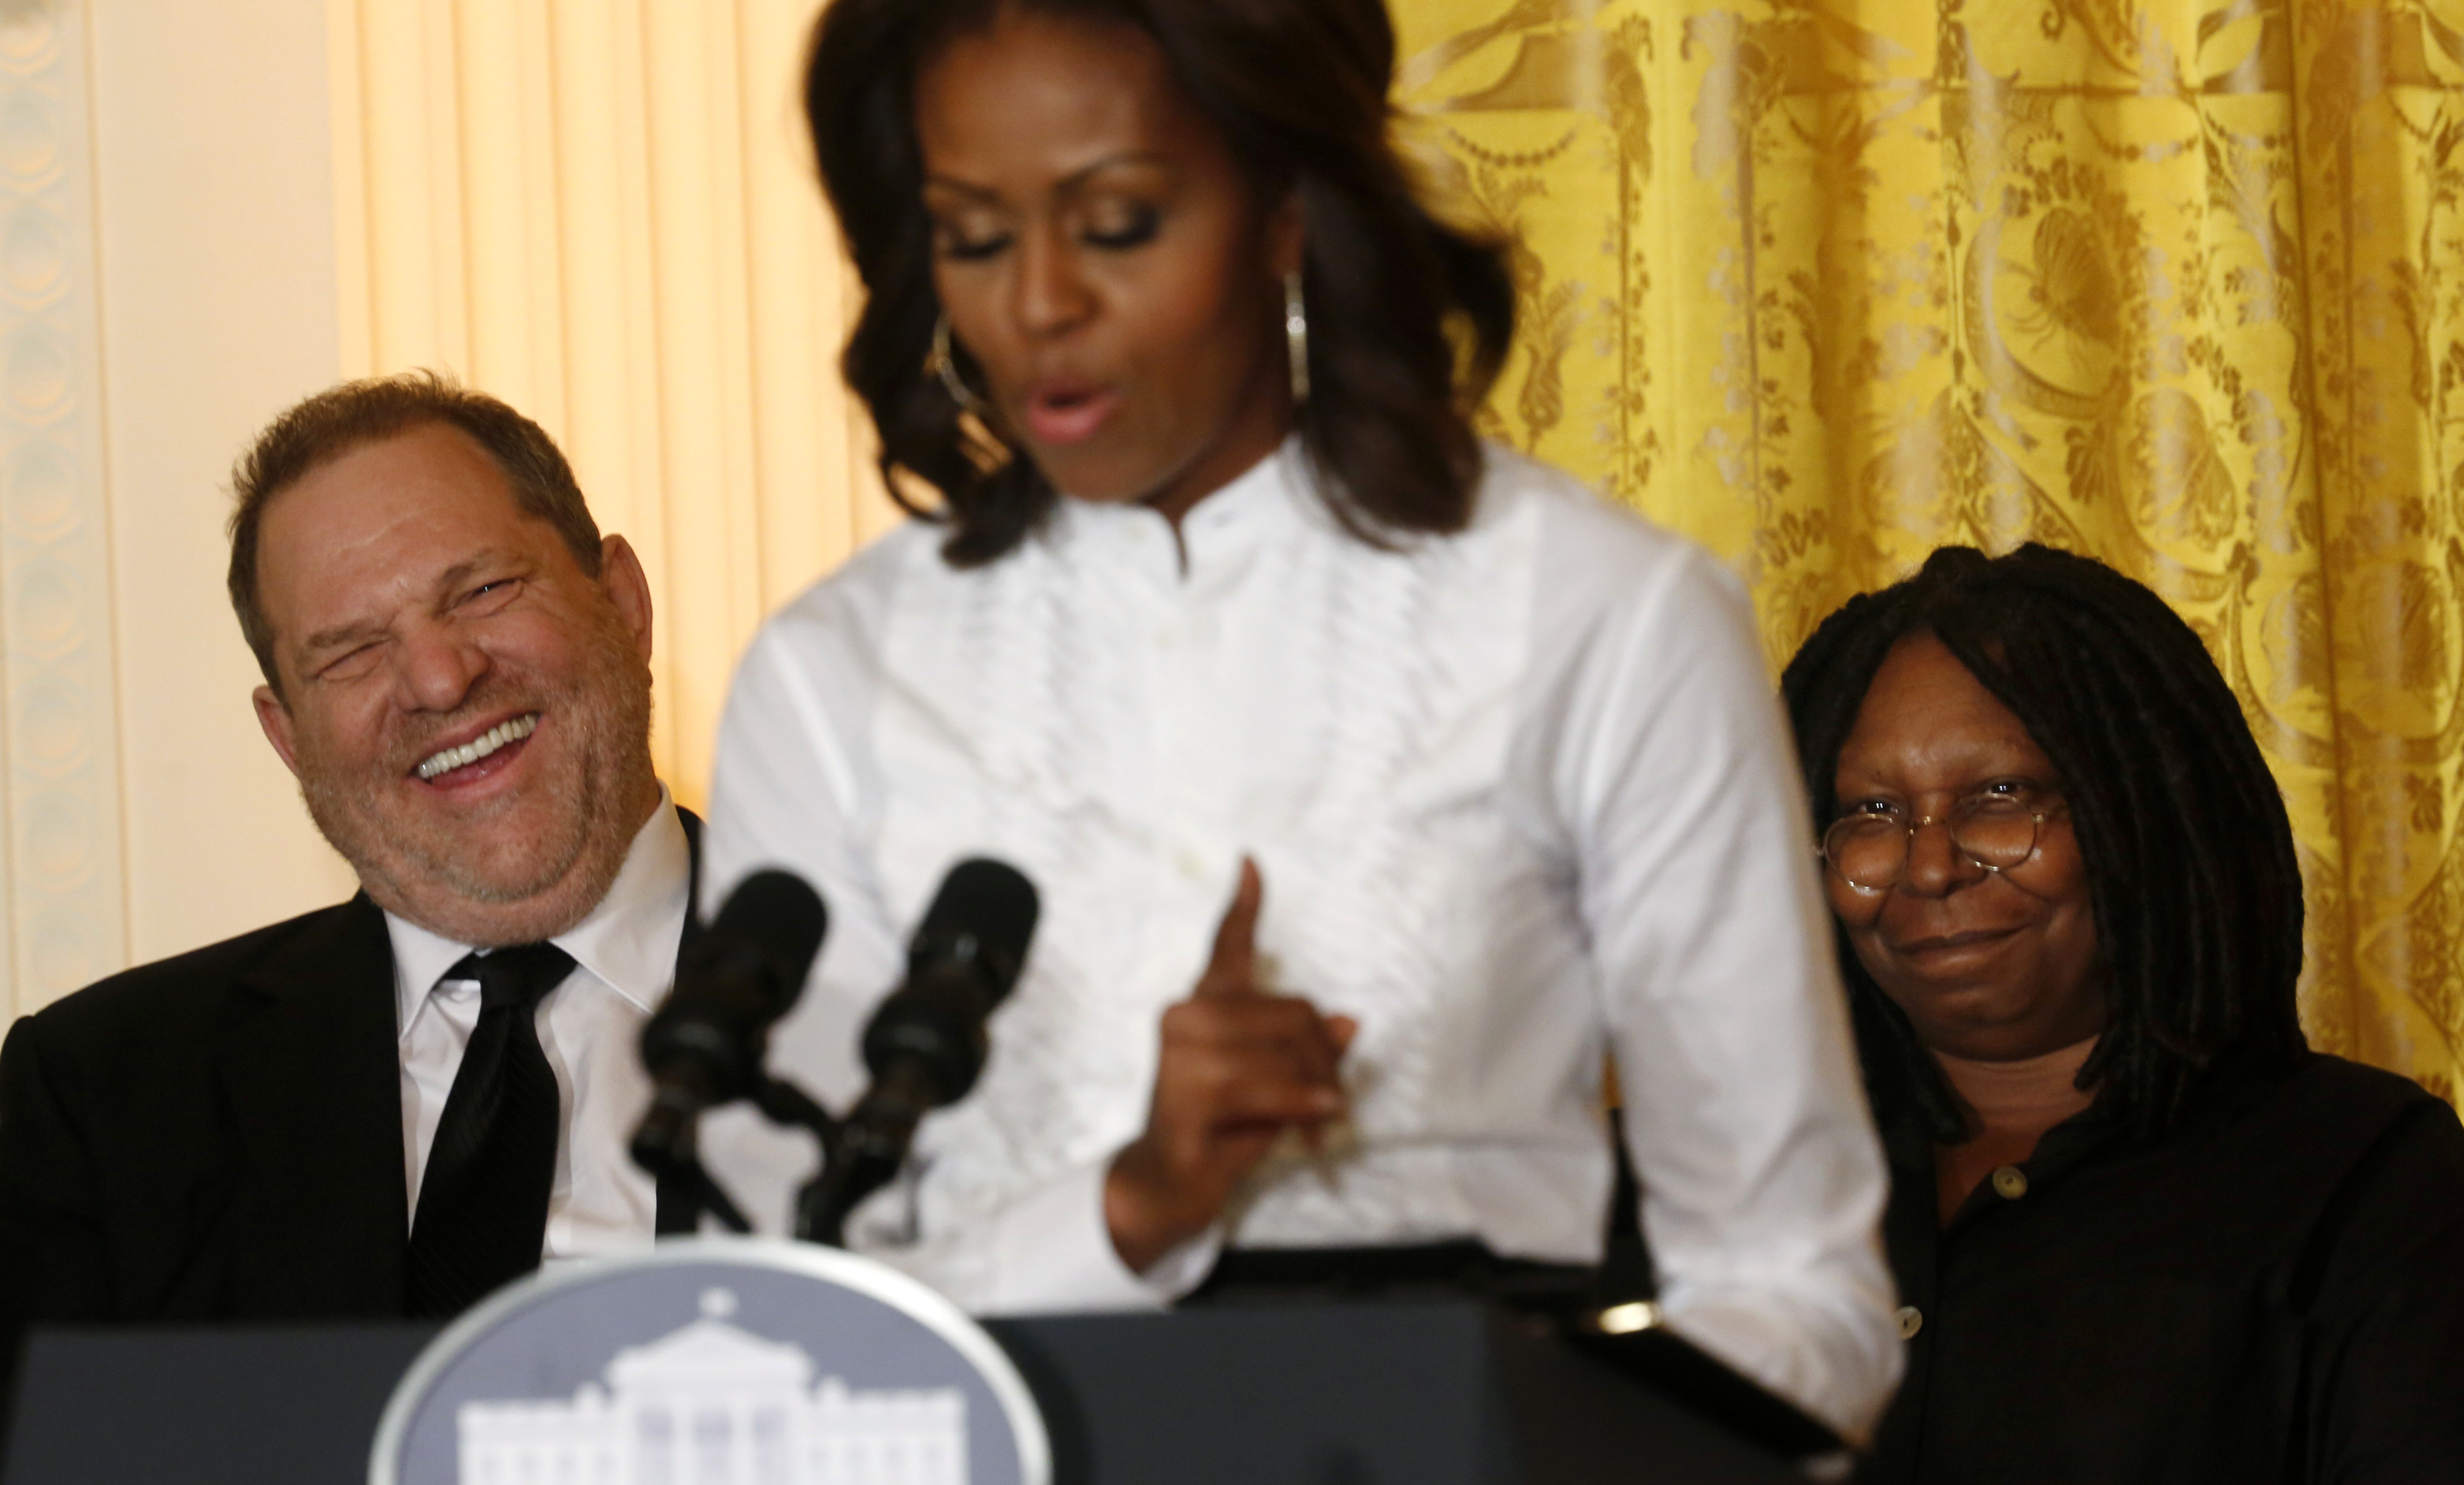 Film producer Weinstein laughs at remarks directed at him by U.S. first lady Michelle Obama as she hosts a workshop at the White House for high school students about careers in film in Washington